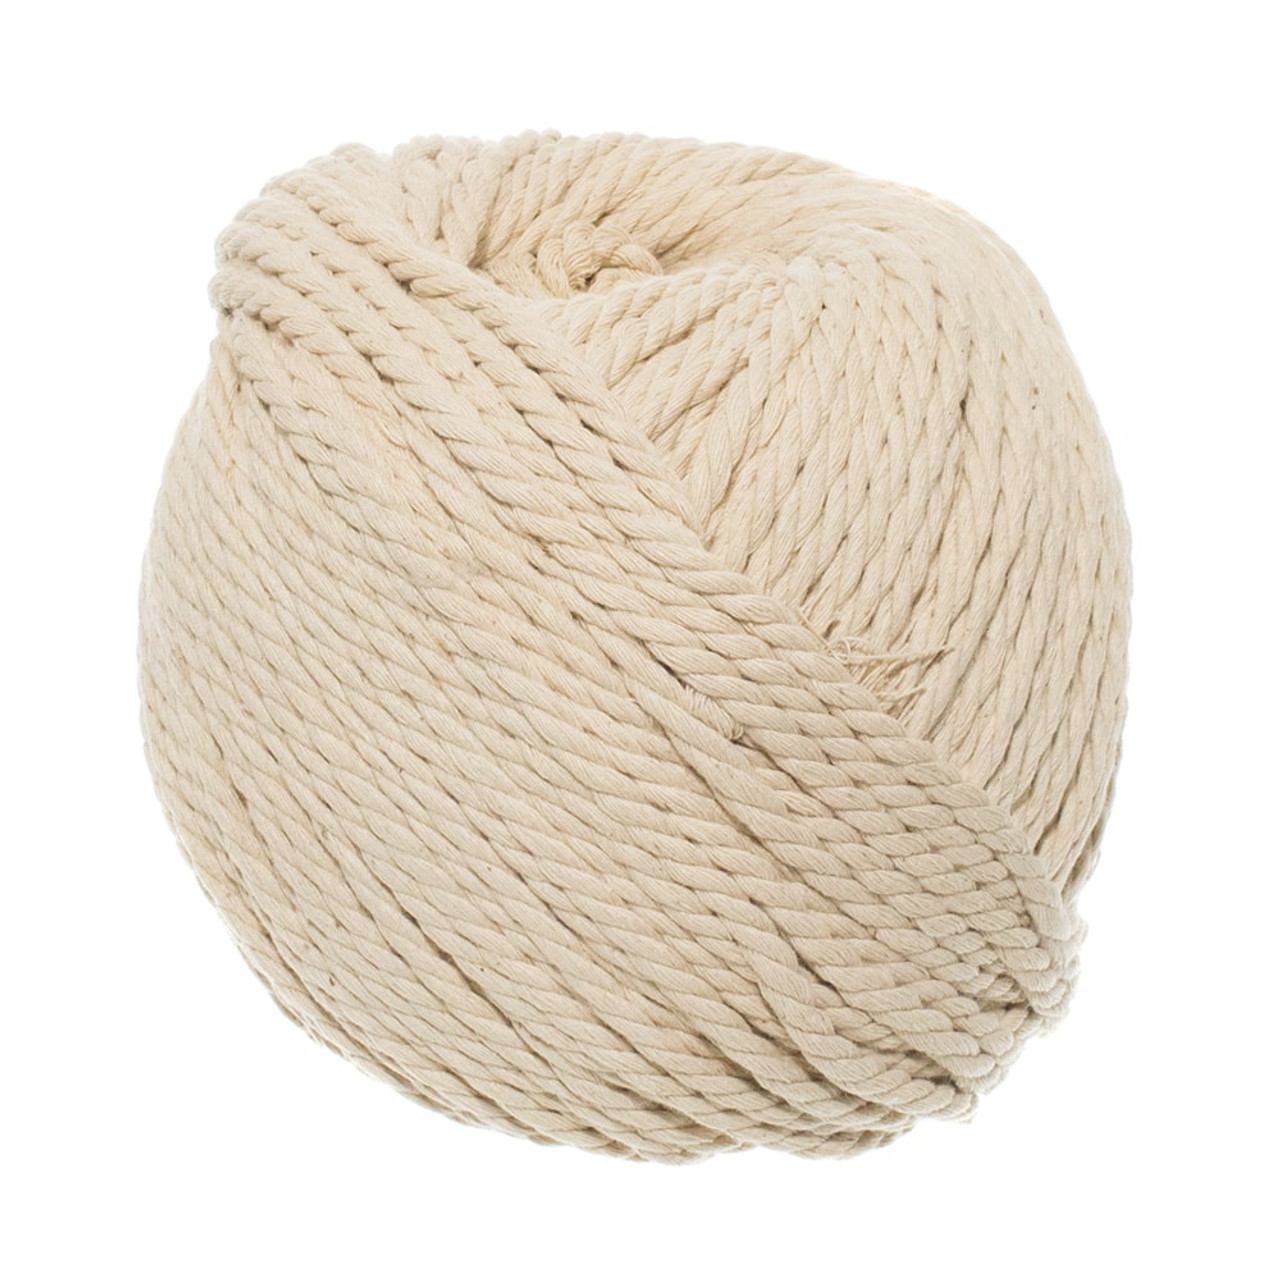 2mm 200mtr Roll Macrame Cotton Rope - Natural — Harry & Wilma